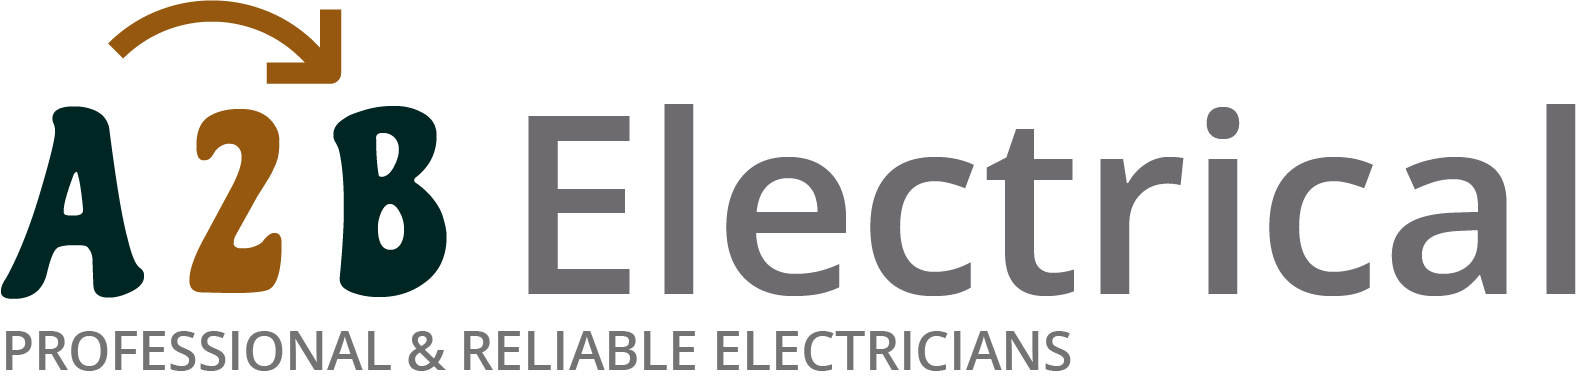 If you have electrical wiring problems in Belgravia, we can provide an electrician to have a look for you. 